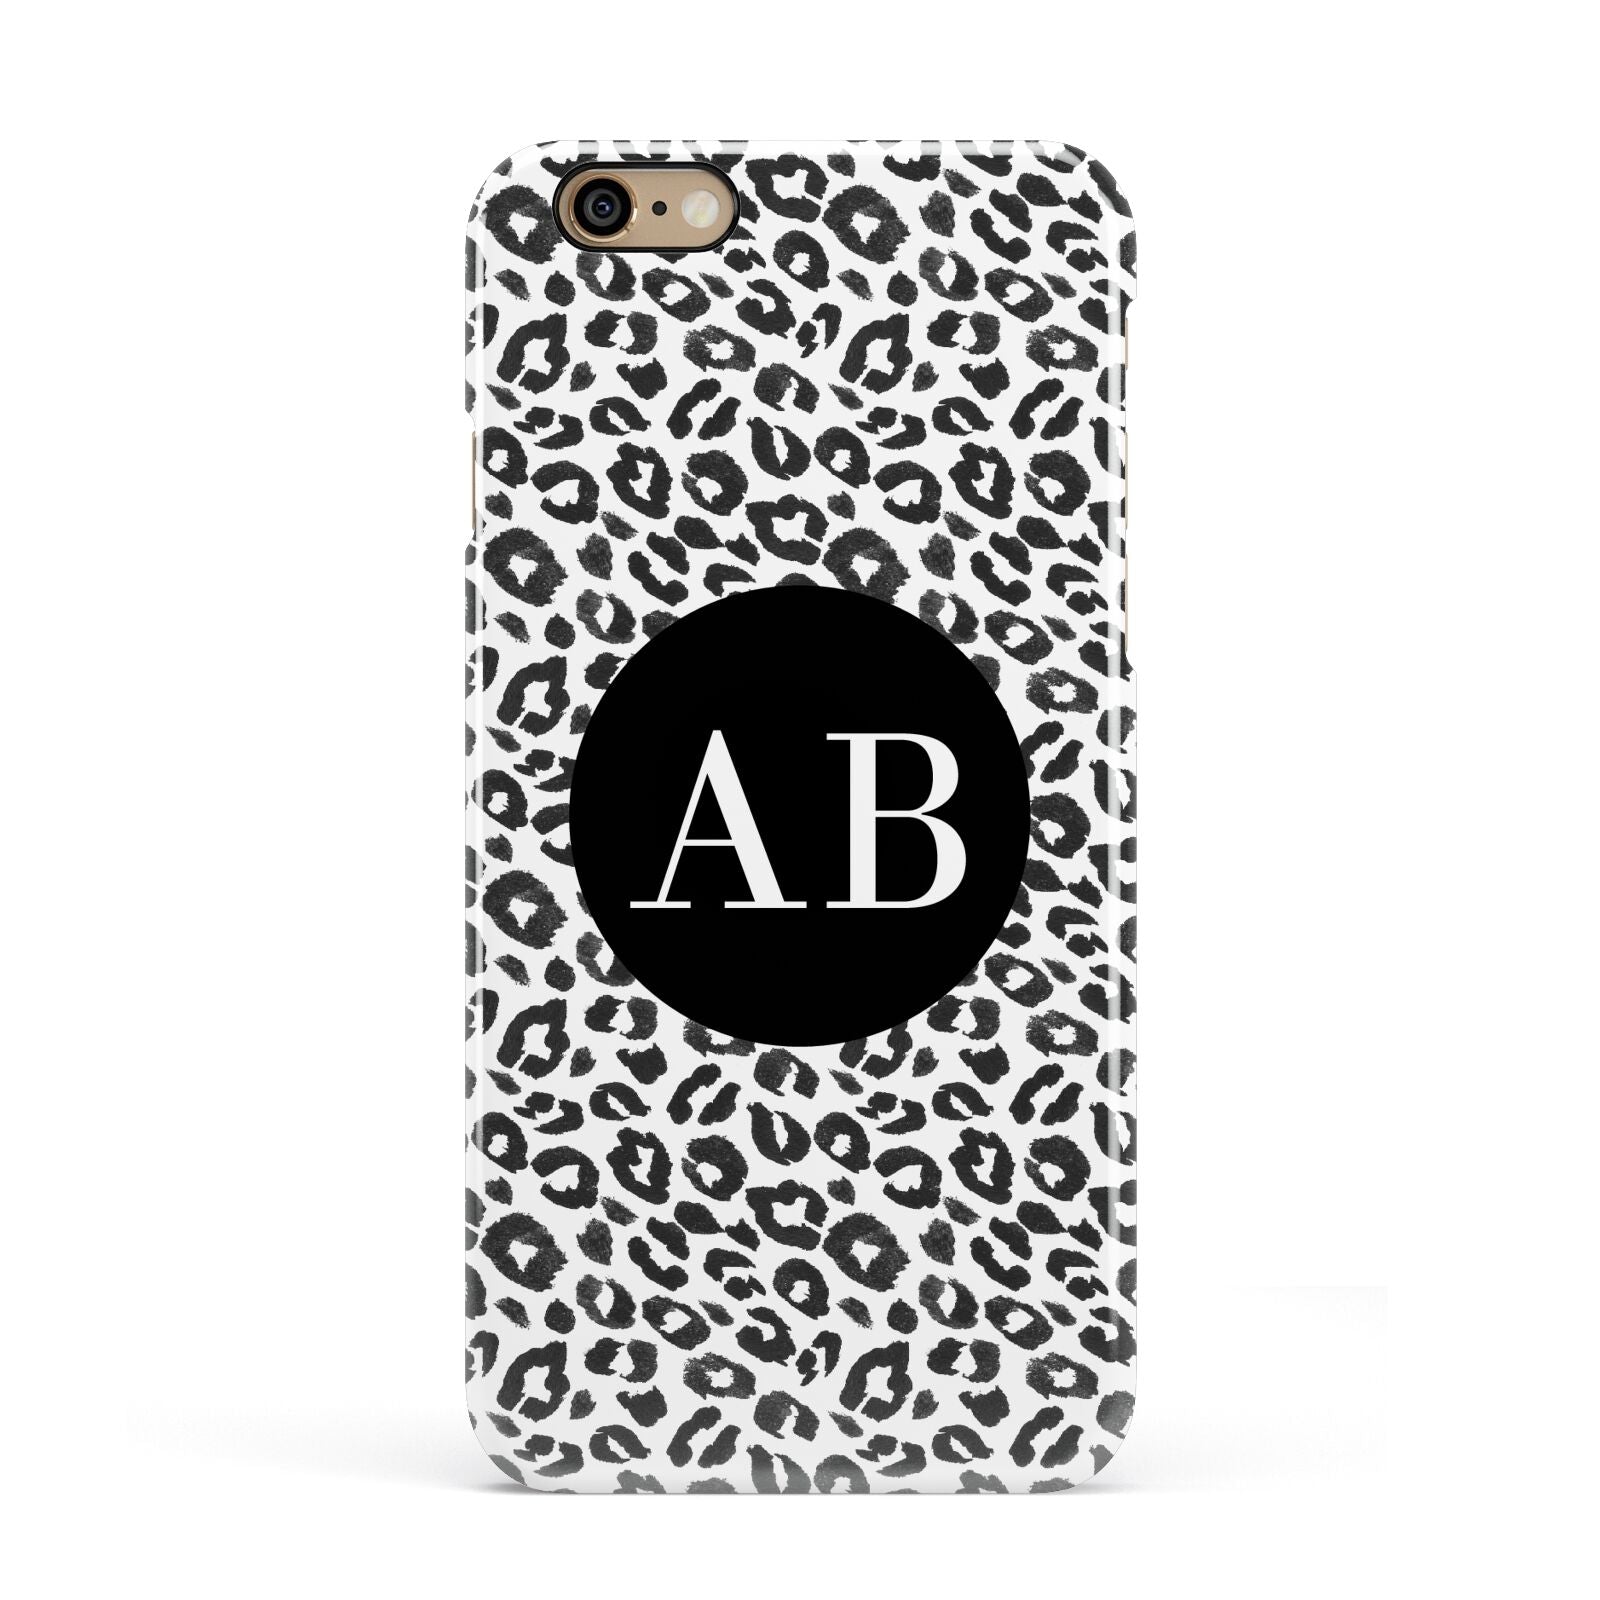 Leopard Print Black and White Apple iPhone 6 3D Snap Case